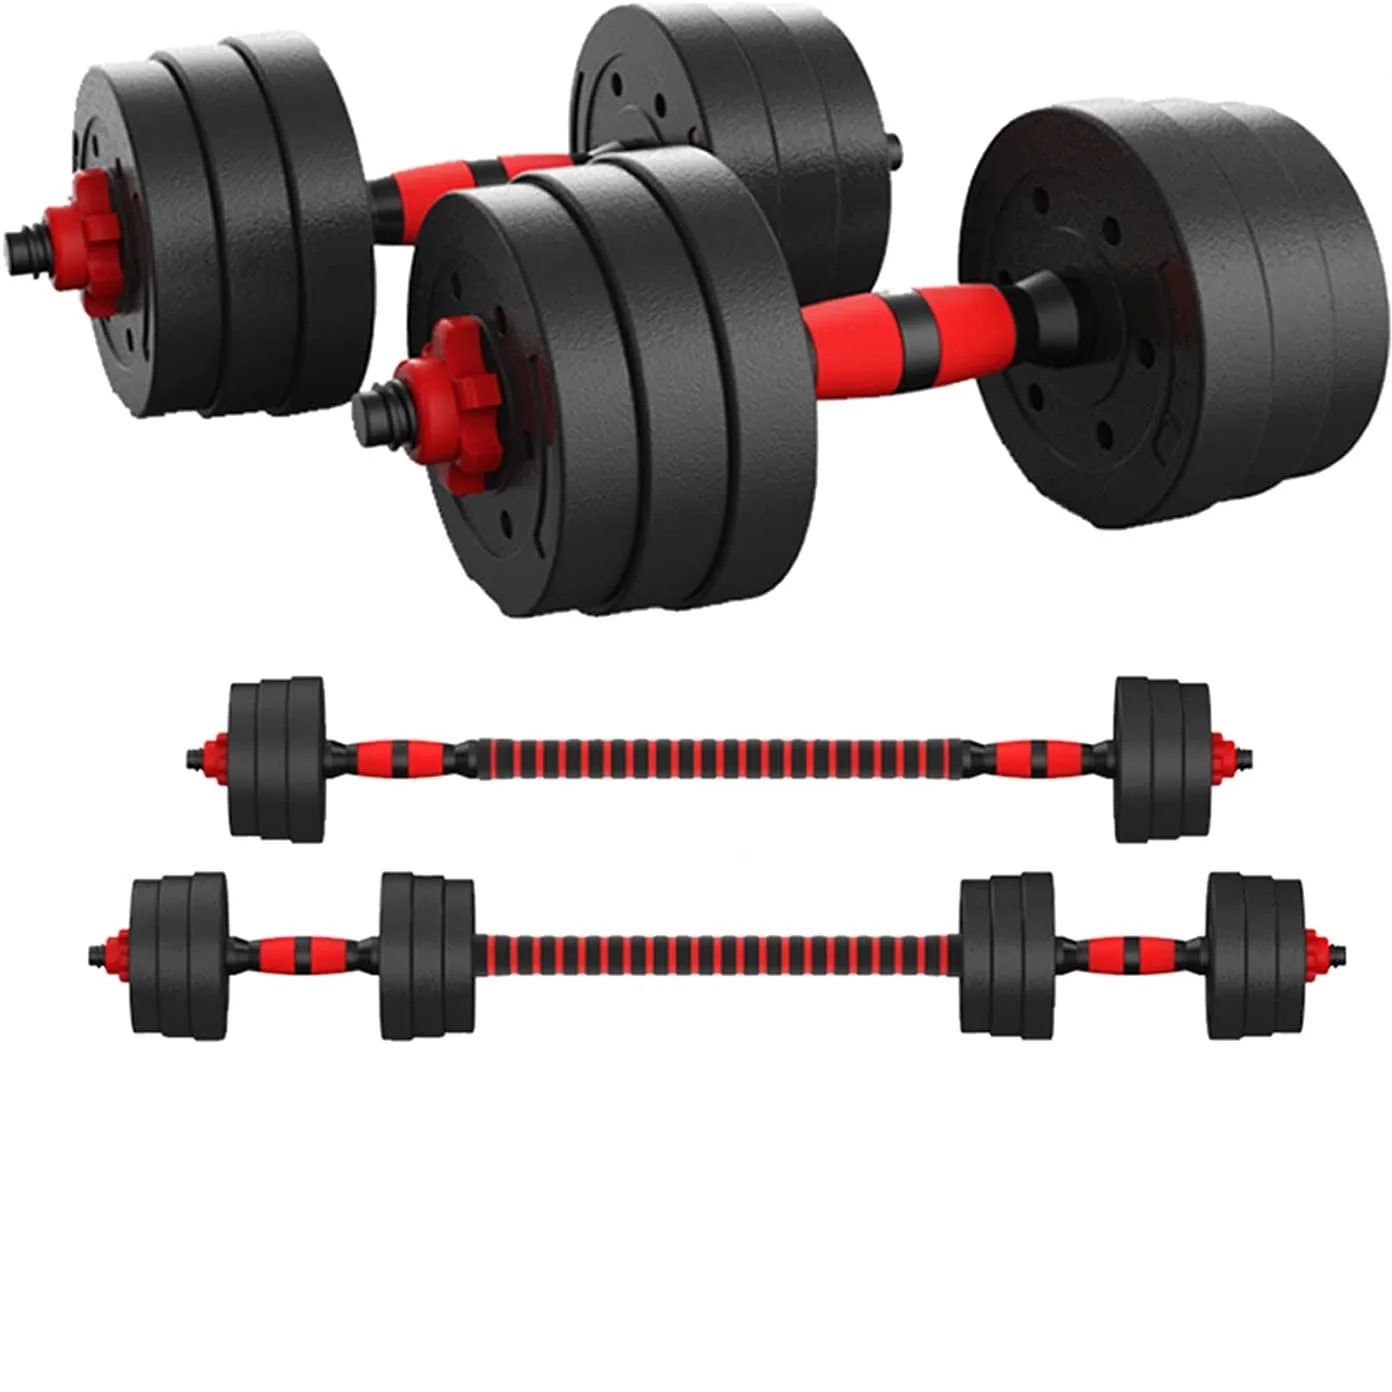 Free Weights Set With Connecting Rod 10KG-40KG Adjustable Weights Dumbbells Set 